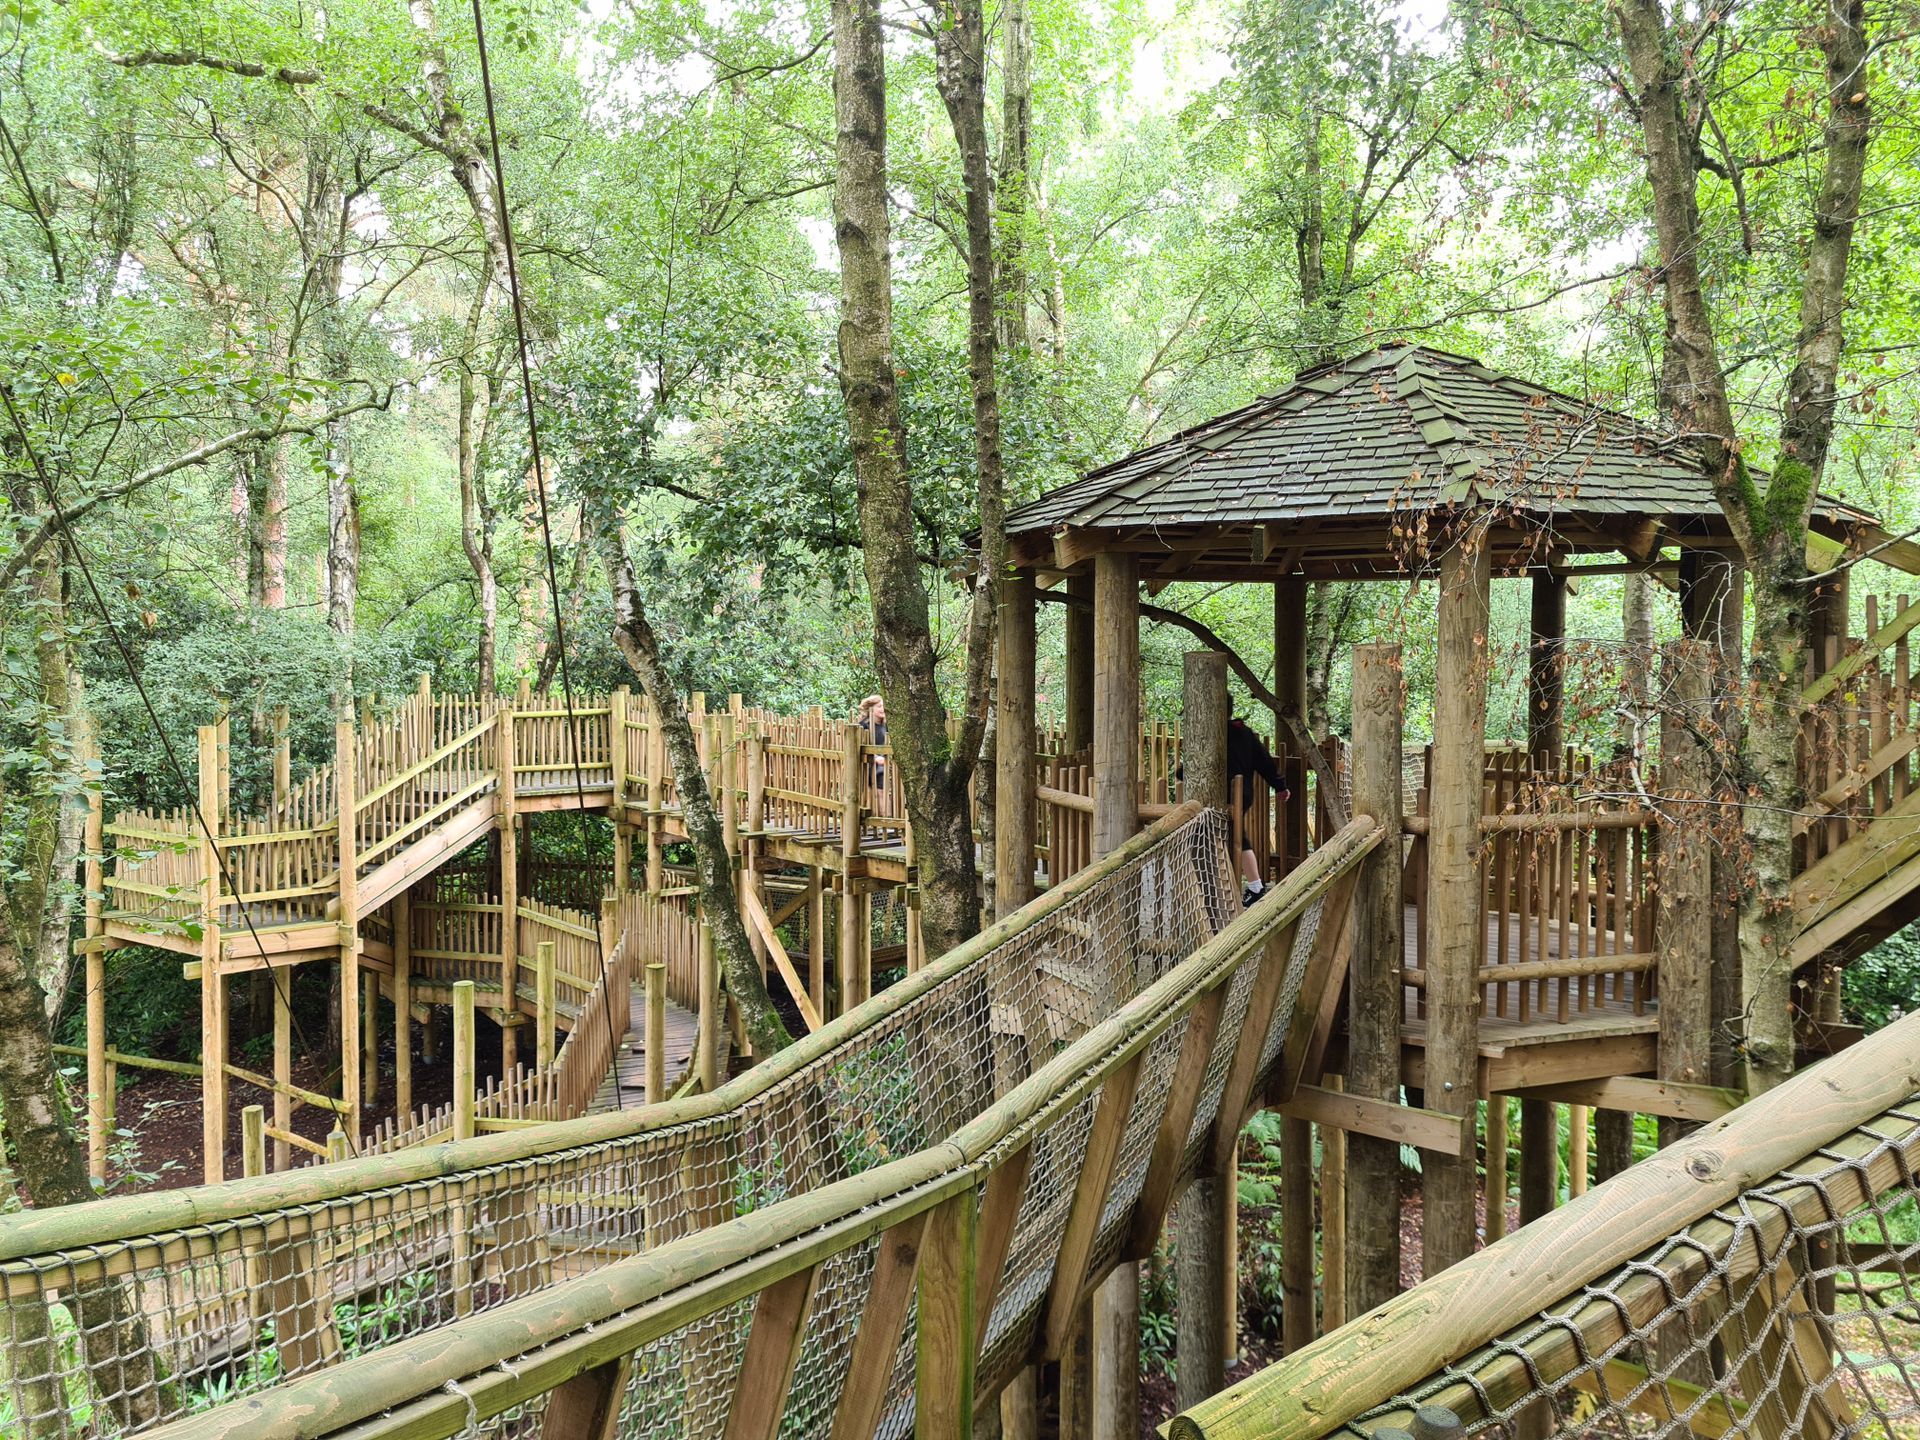 Have an day of adventure at Bewilderwood